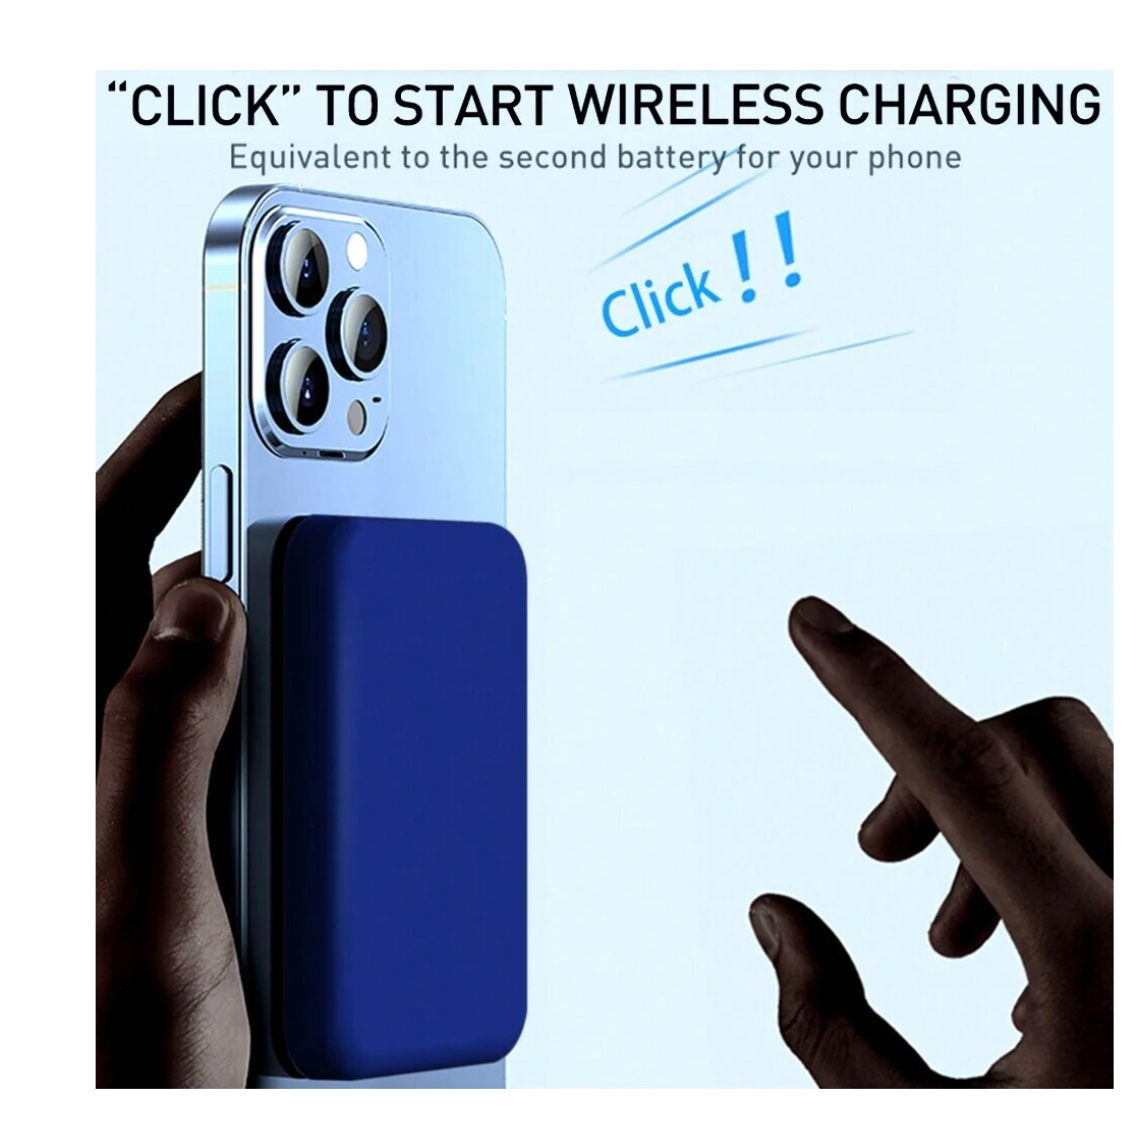 Power in Your Pocket: Wireless Mini Magnetic Power Bank – 15W PD Fast Charging, LED Indicator, Compact and Ready for iPhone 15 to Pro Max!